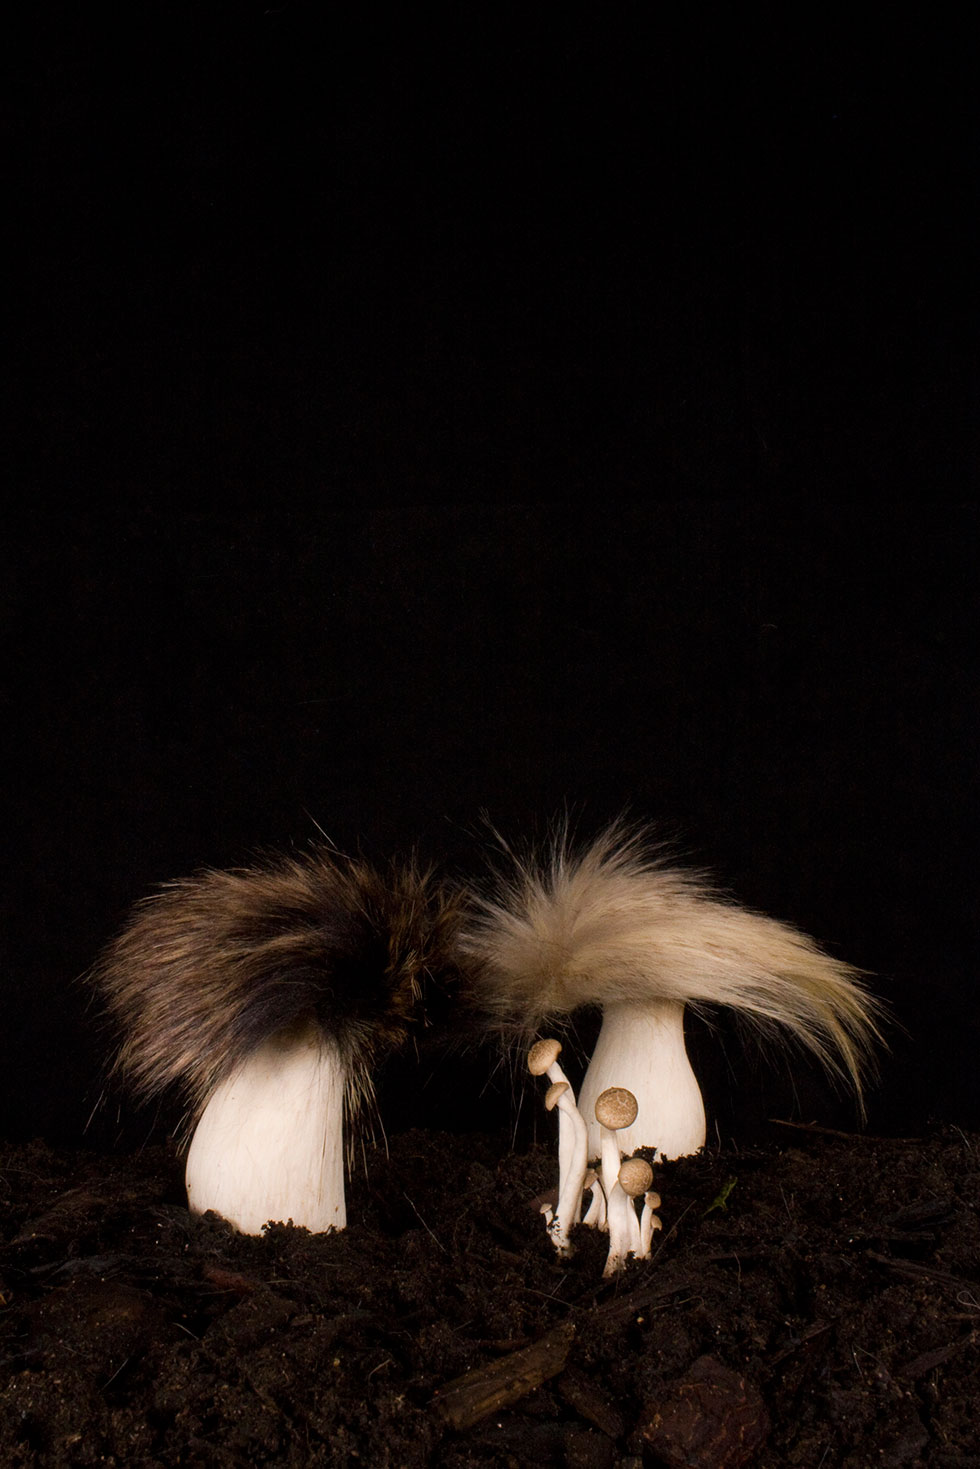 Racoon and Linx Fungi, Carole Collet, 2014